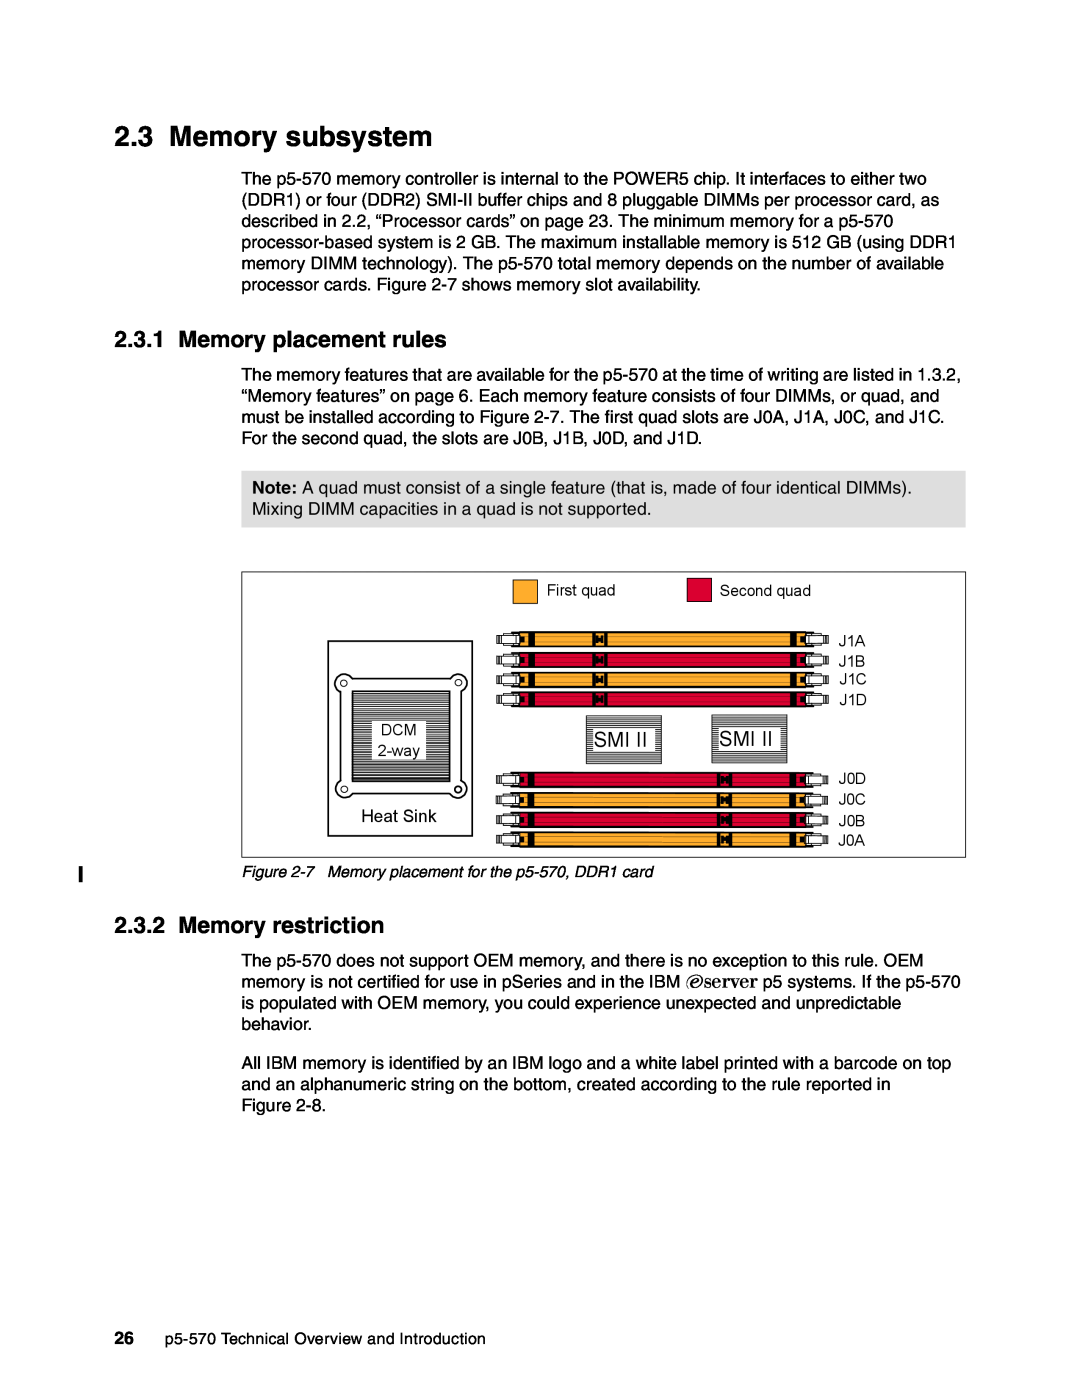 IBM P5 570 manual Memory subsystem, Memory placement rules, Memory restriction 